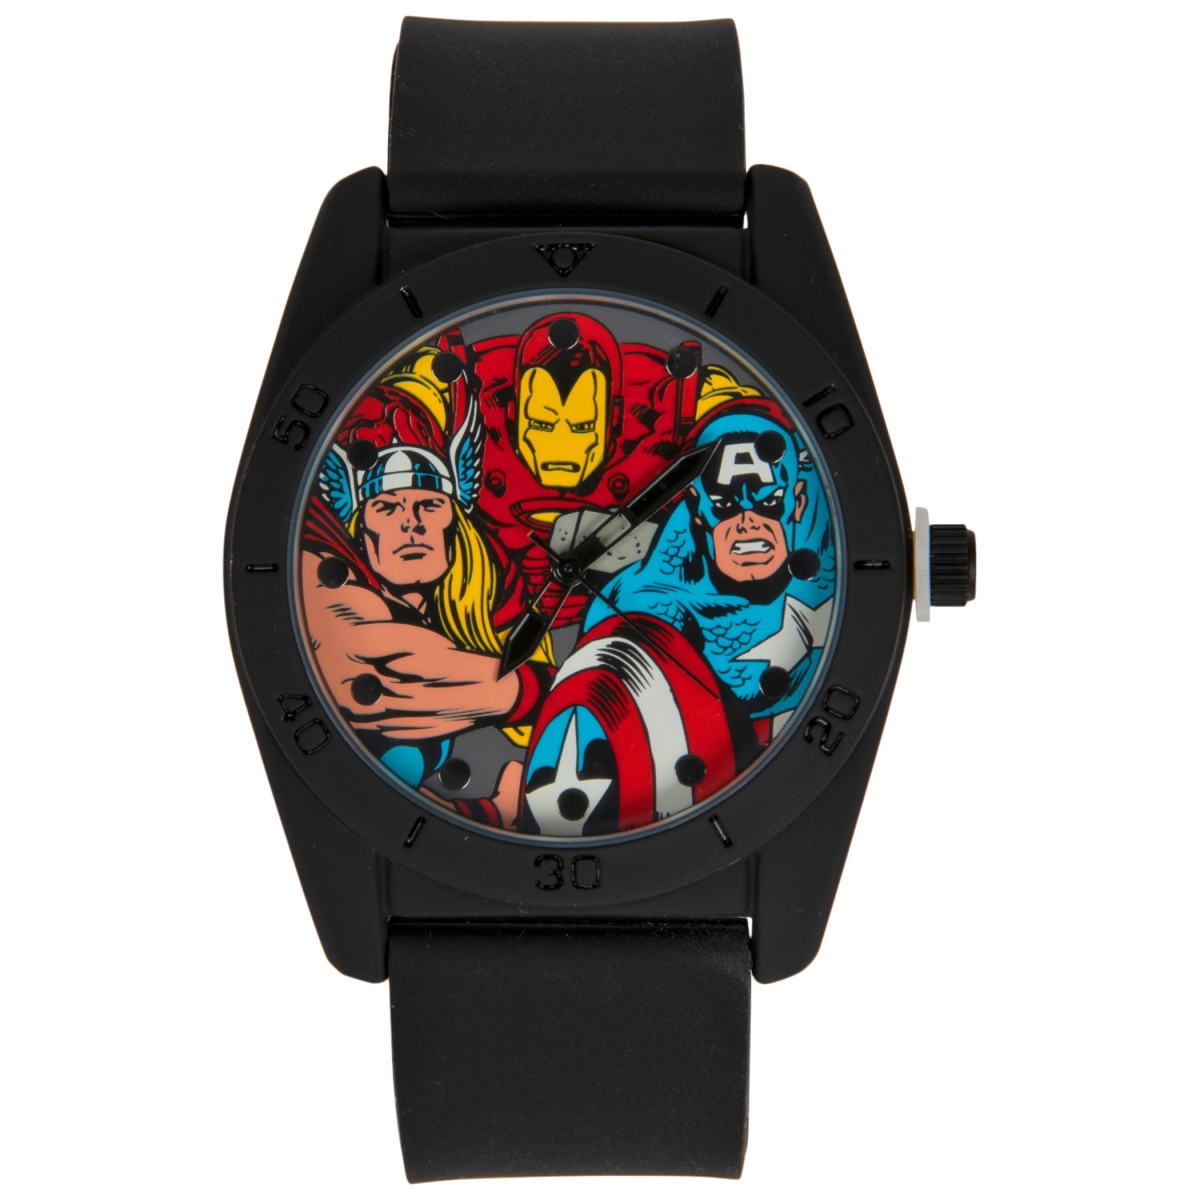 Avenger s 838021 Marvel Comics Classic Avengers Characters Watch with Rubber Strap